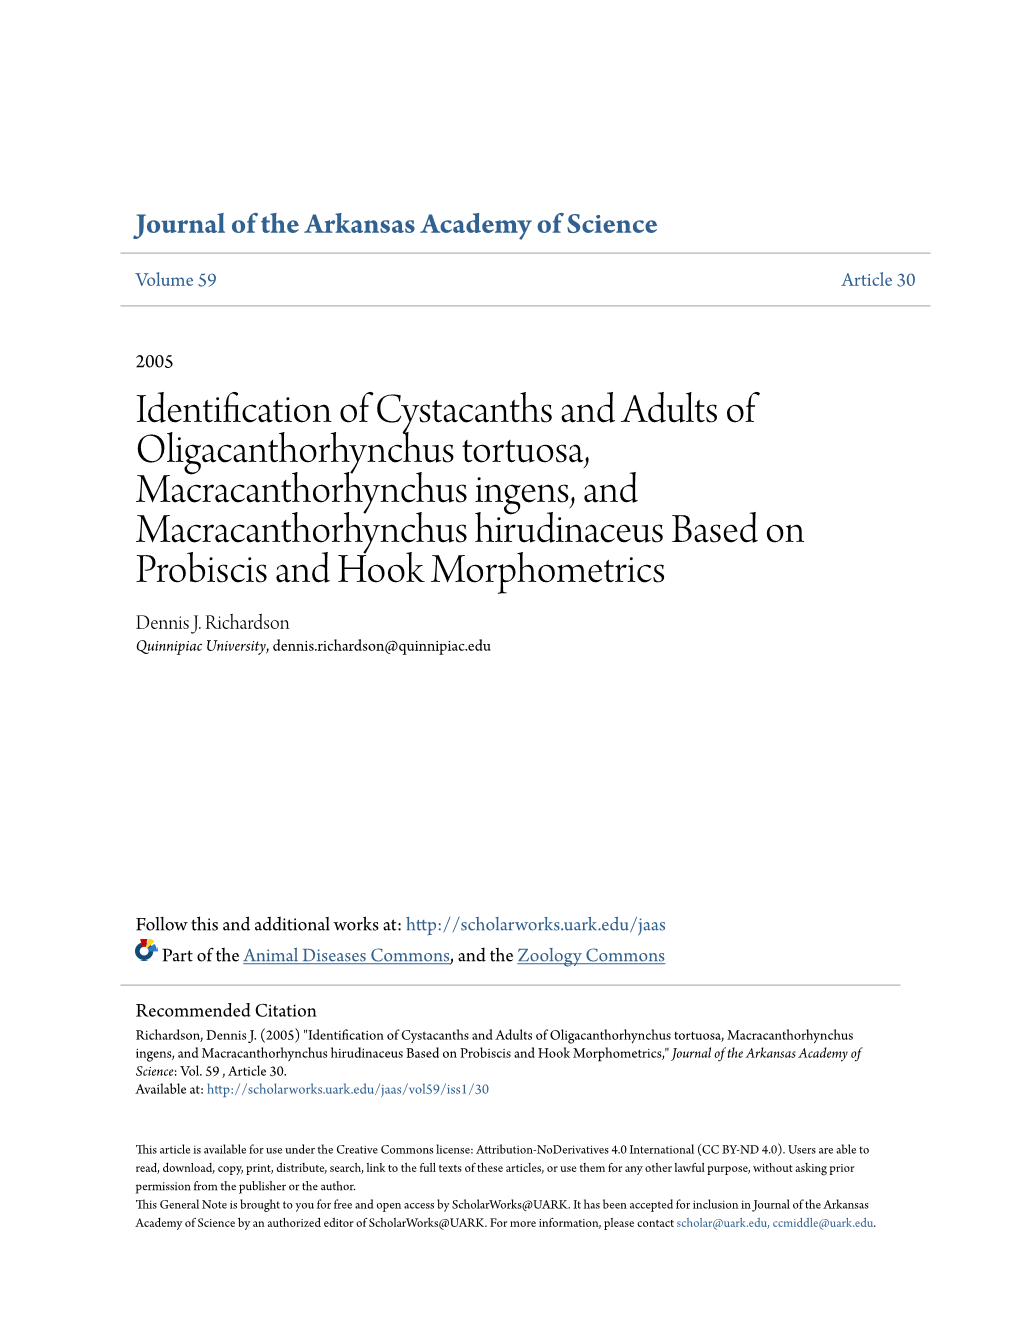 Identification of Cystacanths and Adults of Oligacanthorhynchus